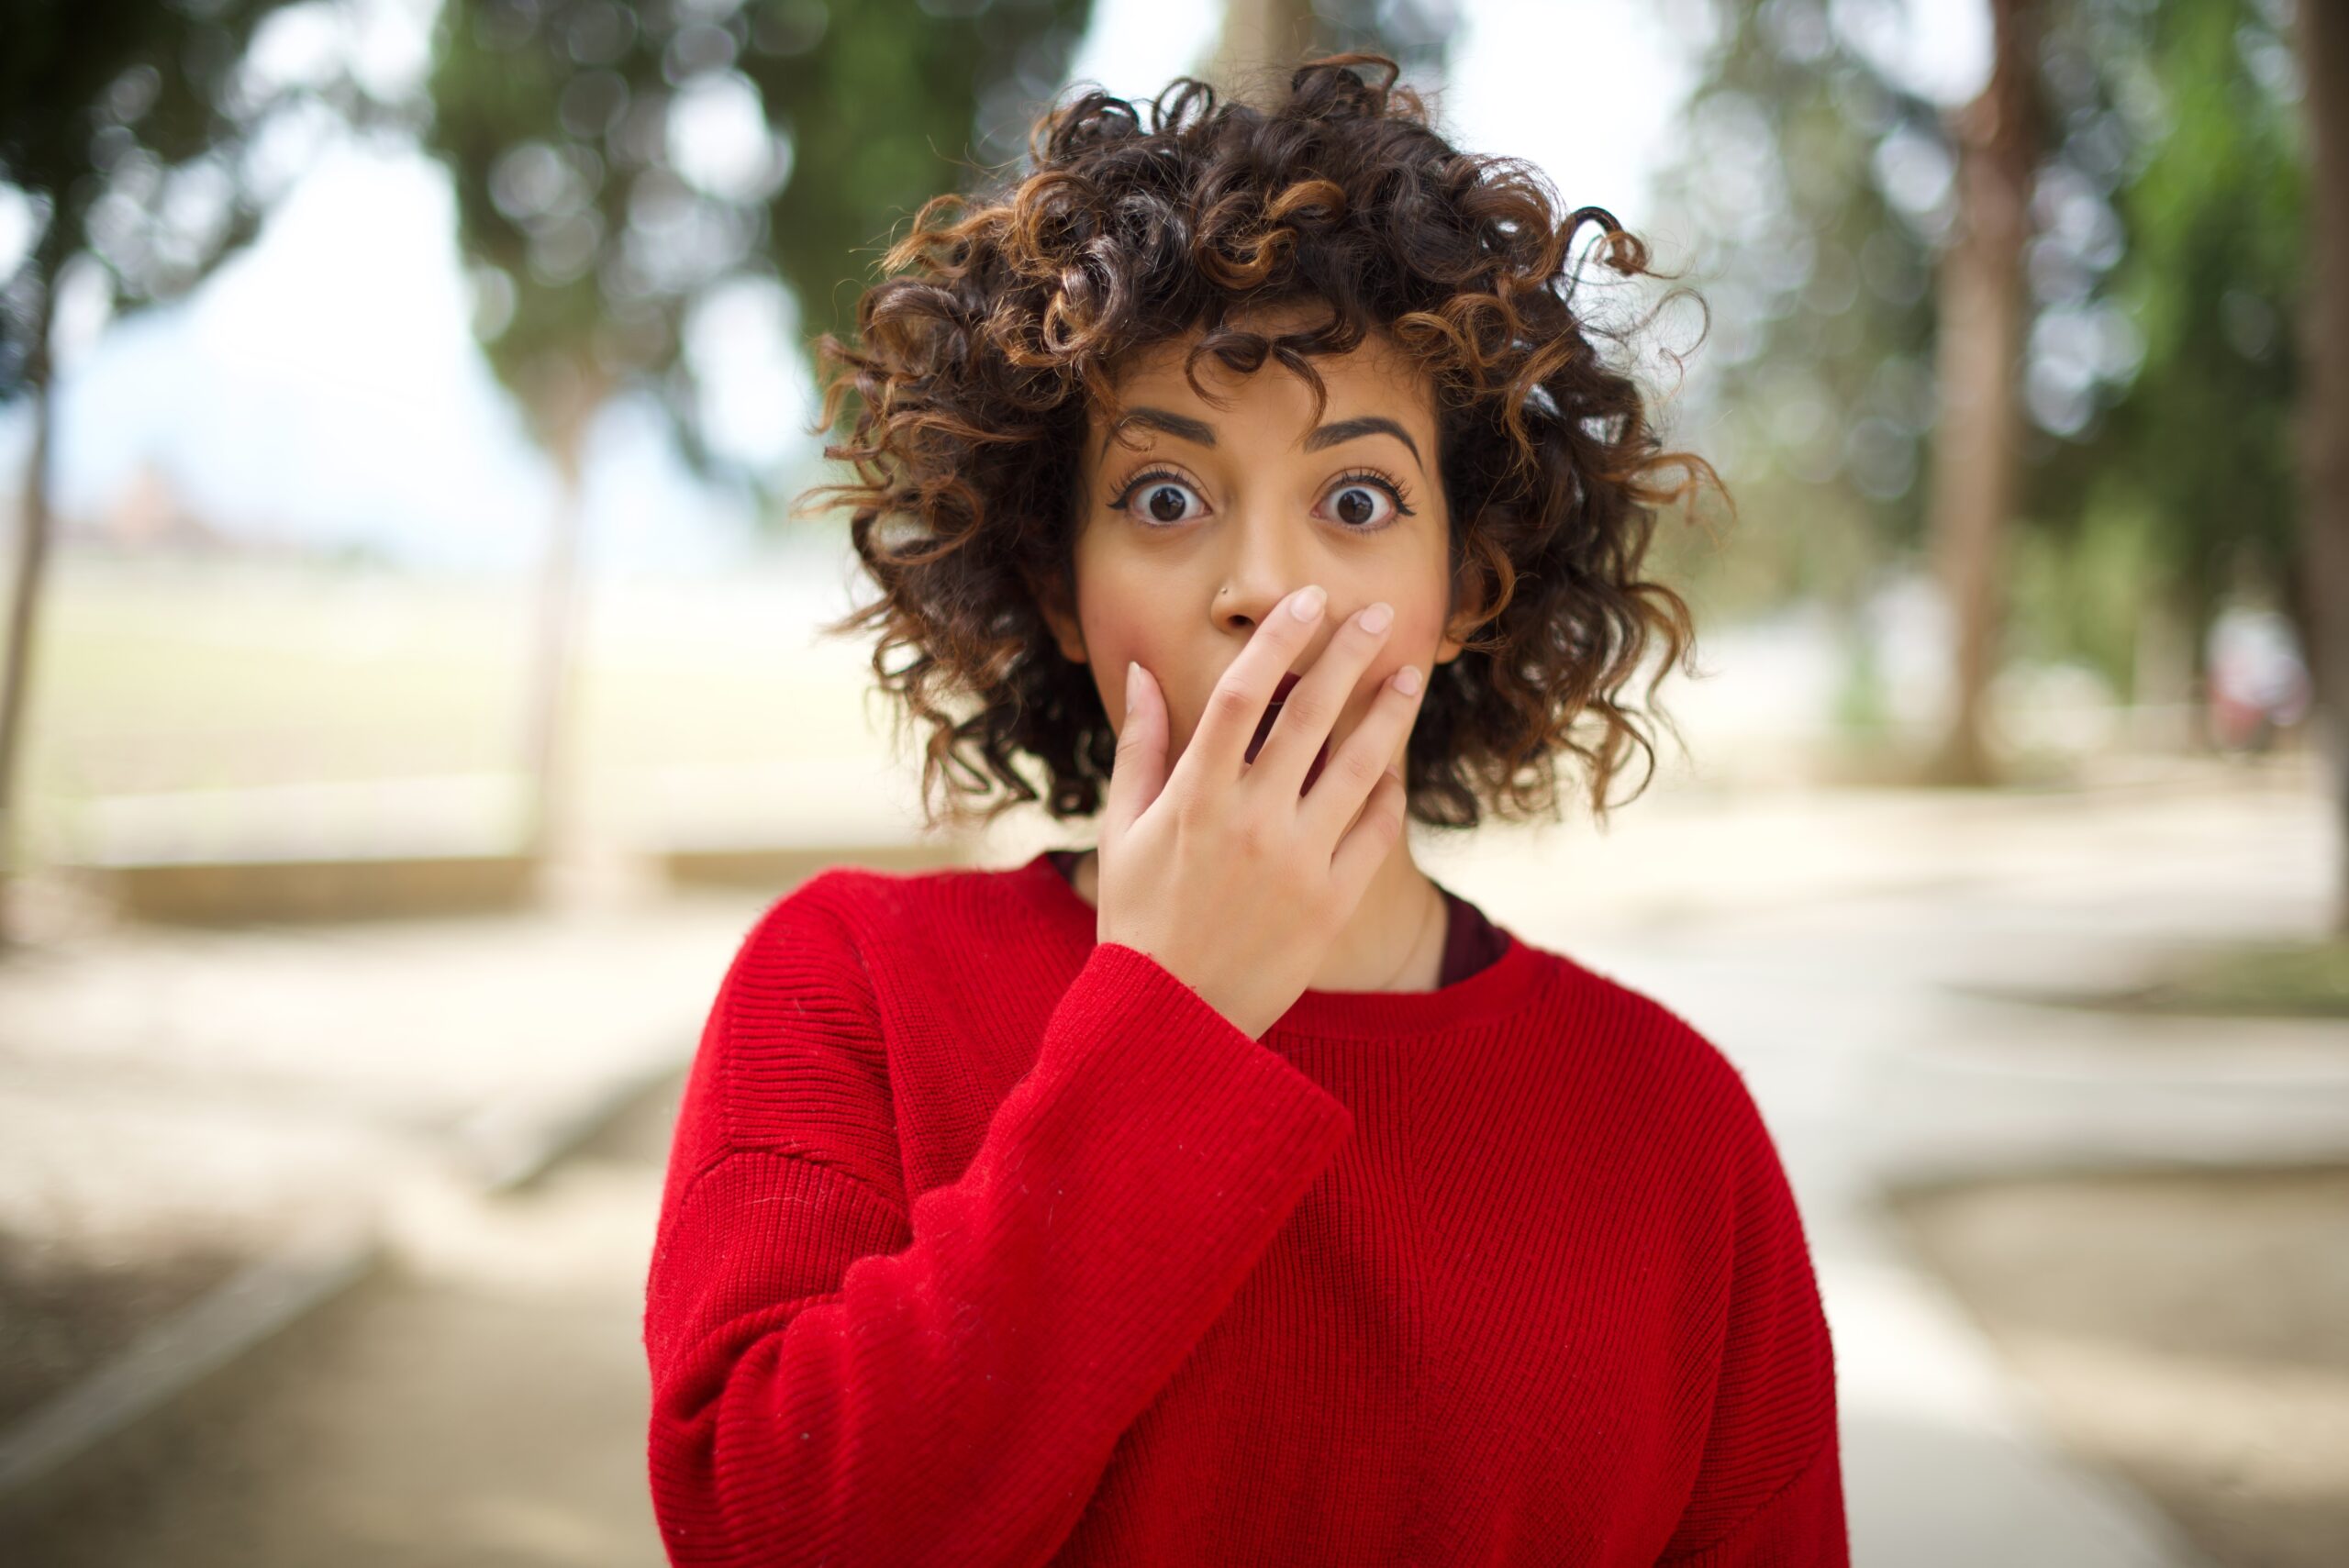 Woman wearing red sweater gasps with hand covering mouth